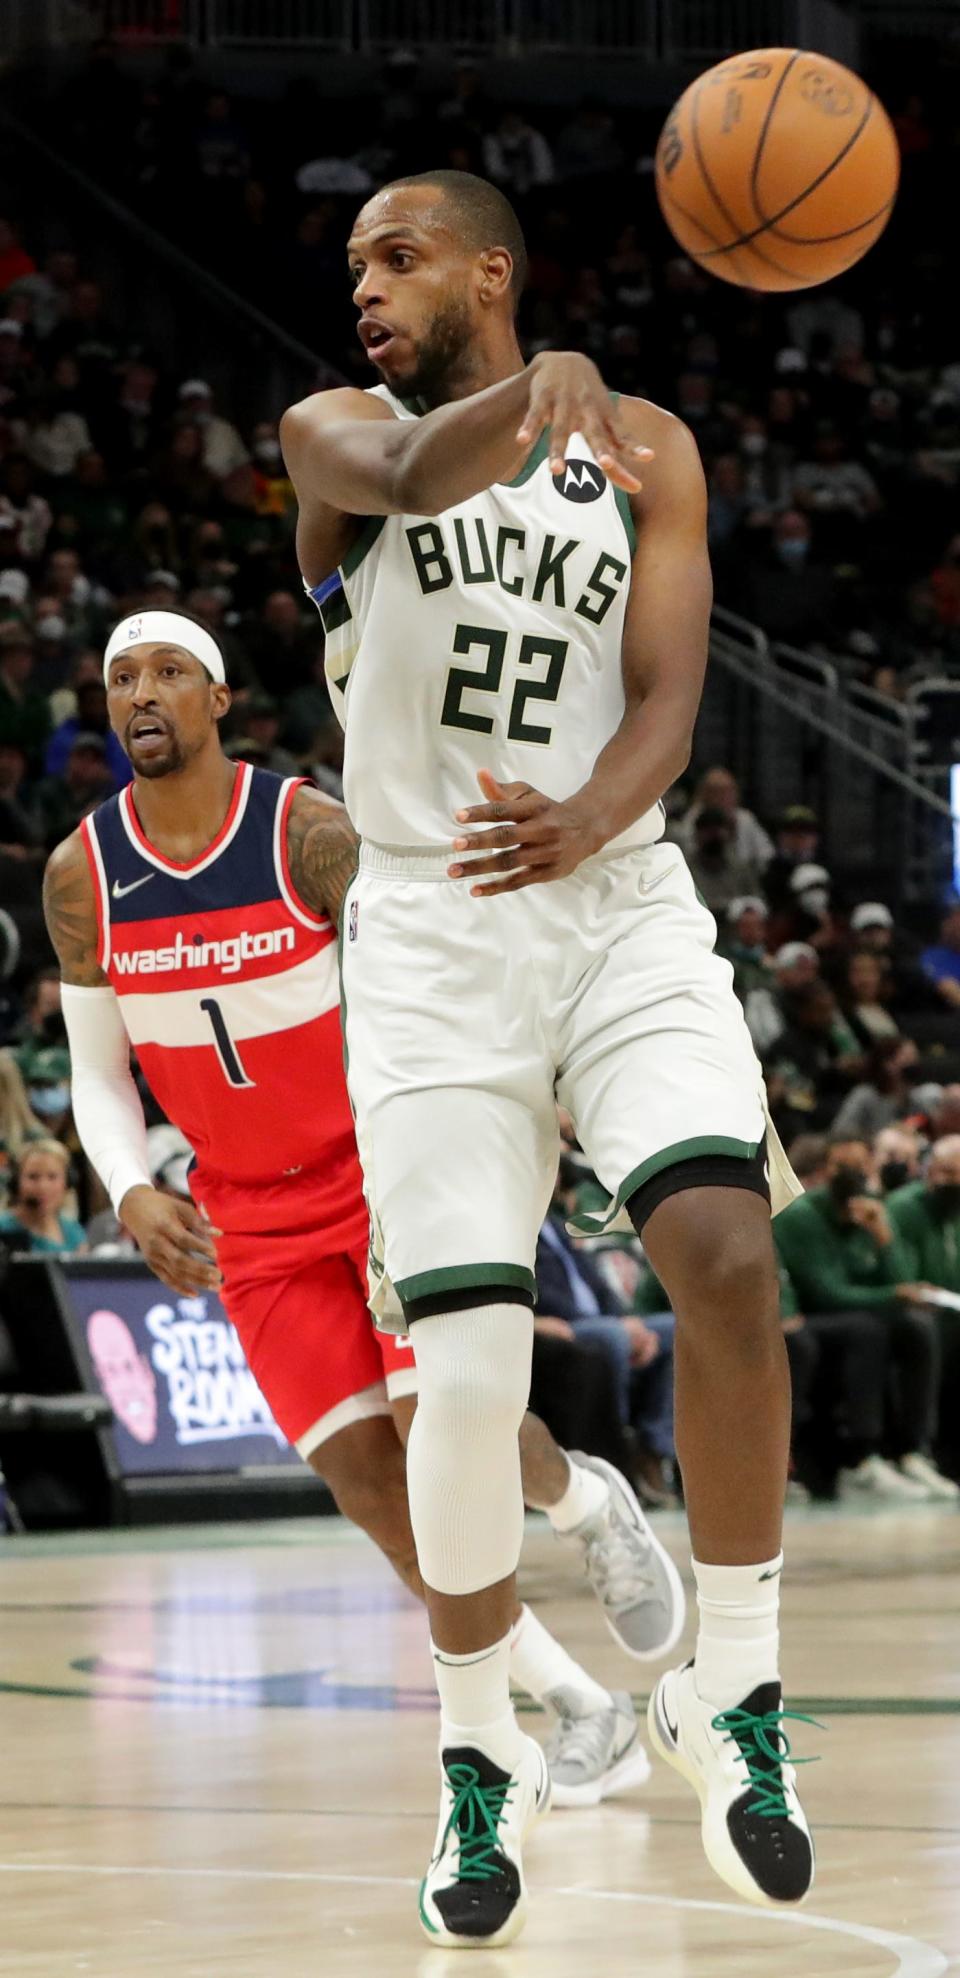 Three-time all-star Khris Middleton underwent surgery on his right knee after the playoffs after playing in 33 games last season.